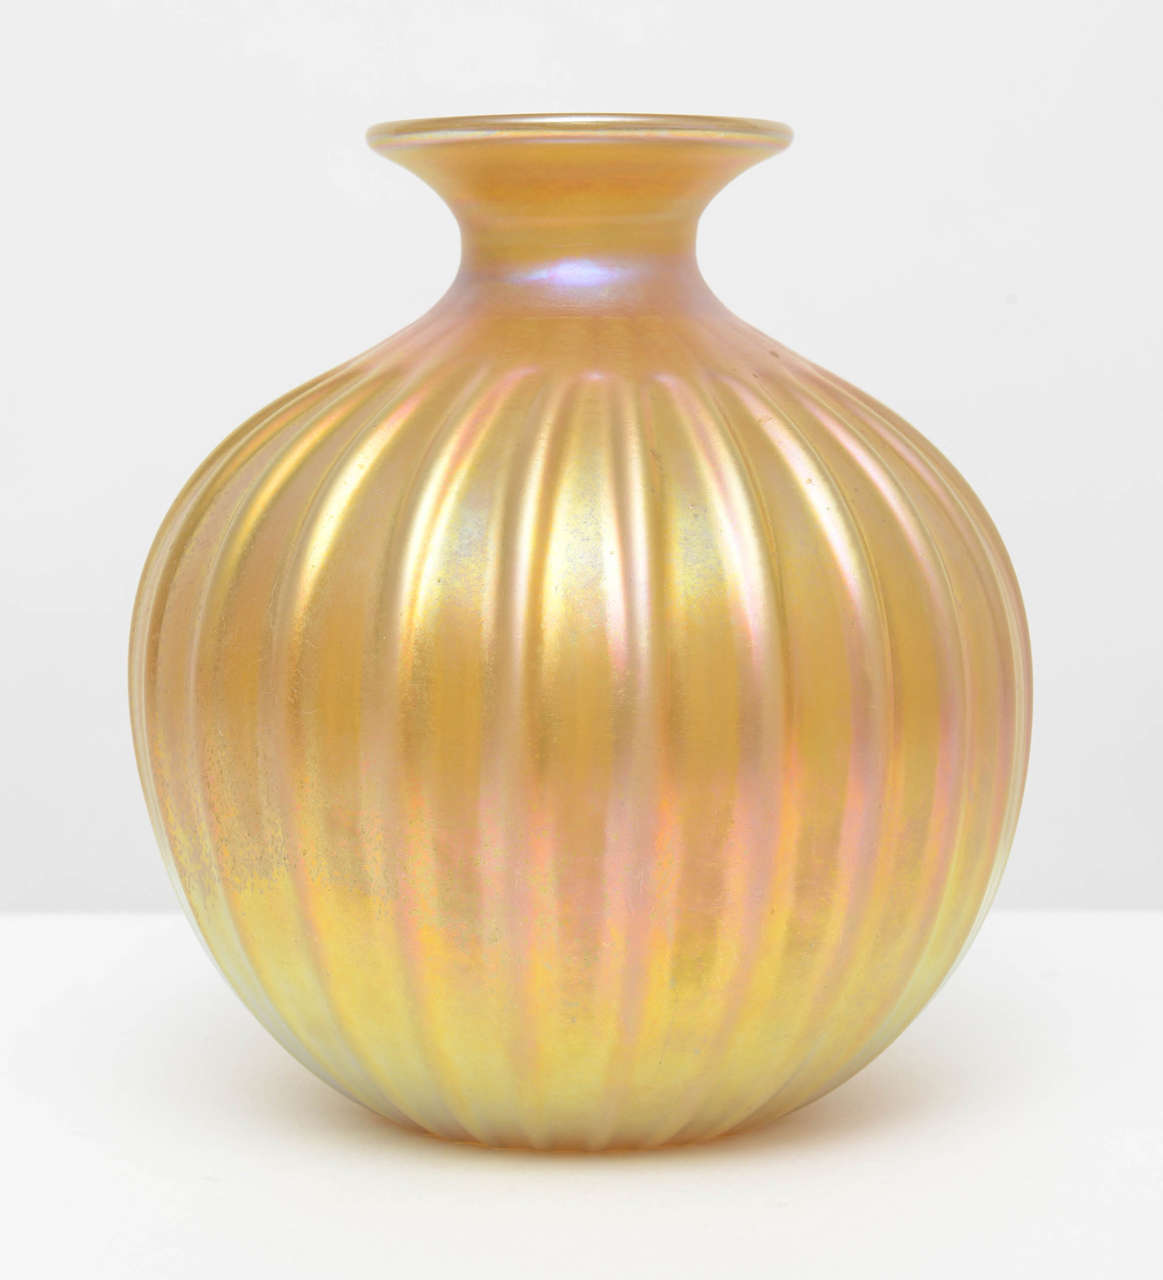 Gold toned Murano vase, handblown and rolled with a golden iridescent coloring that reflects the light in a number of shades.